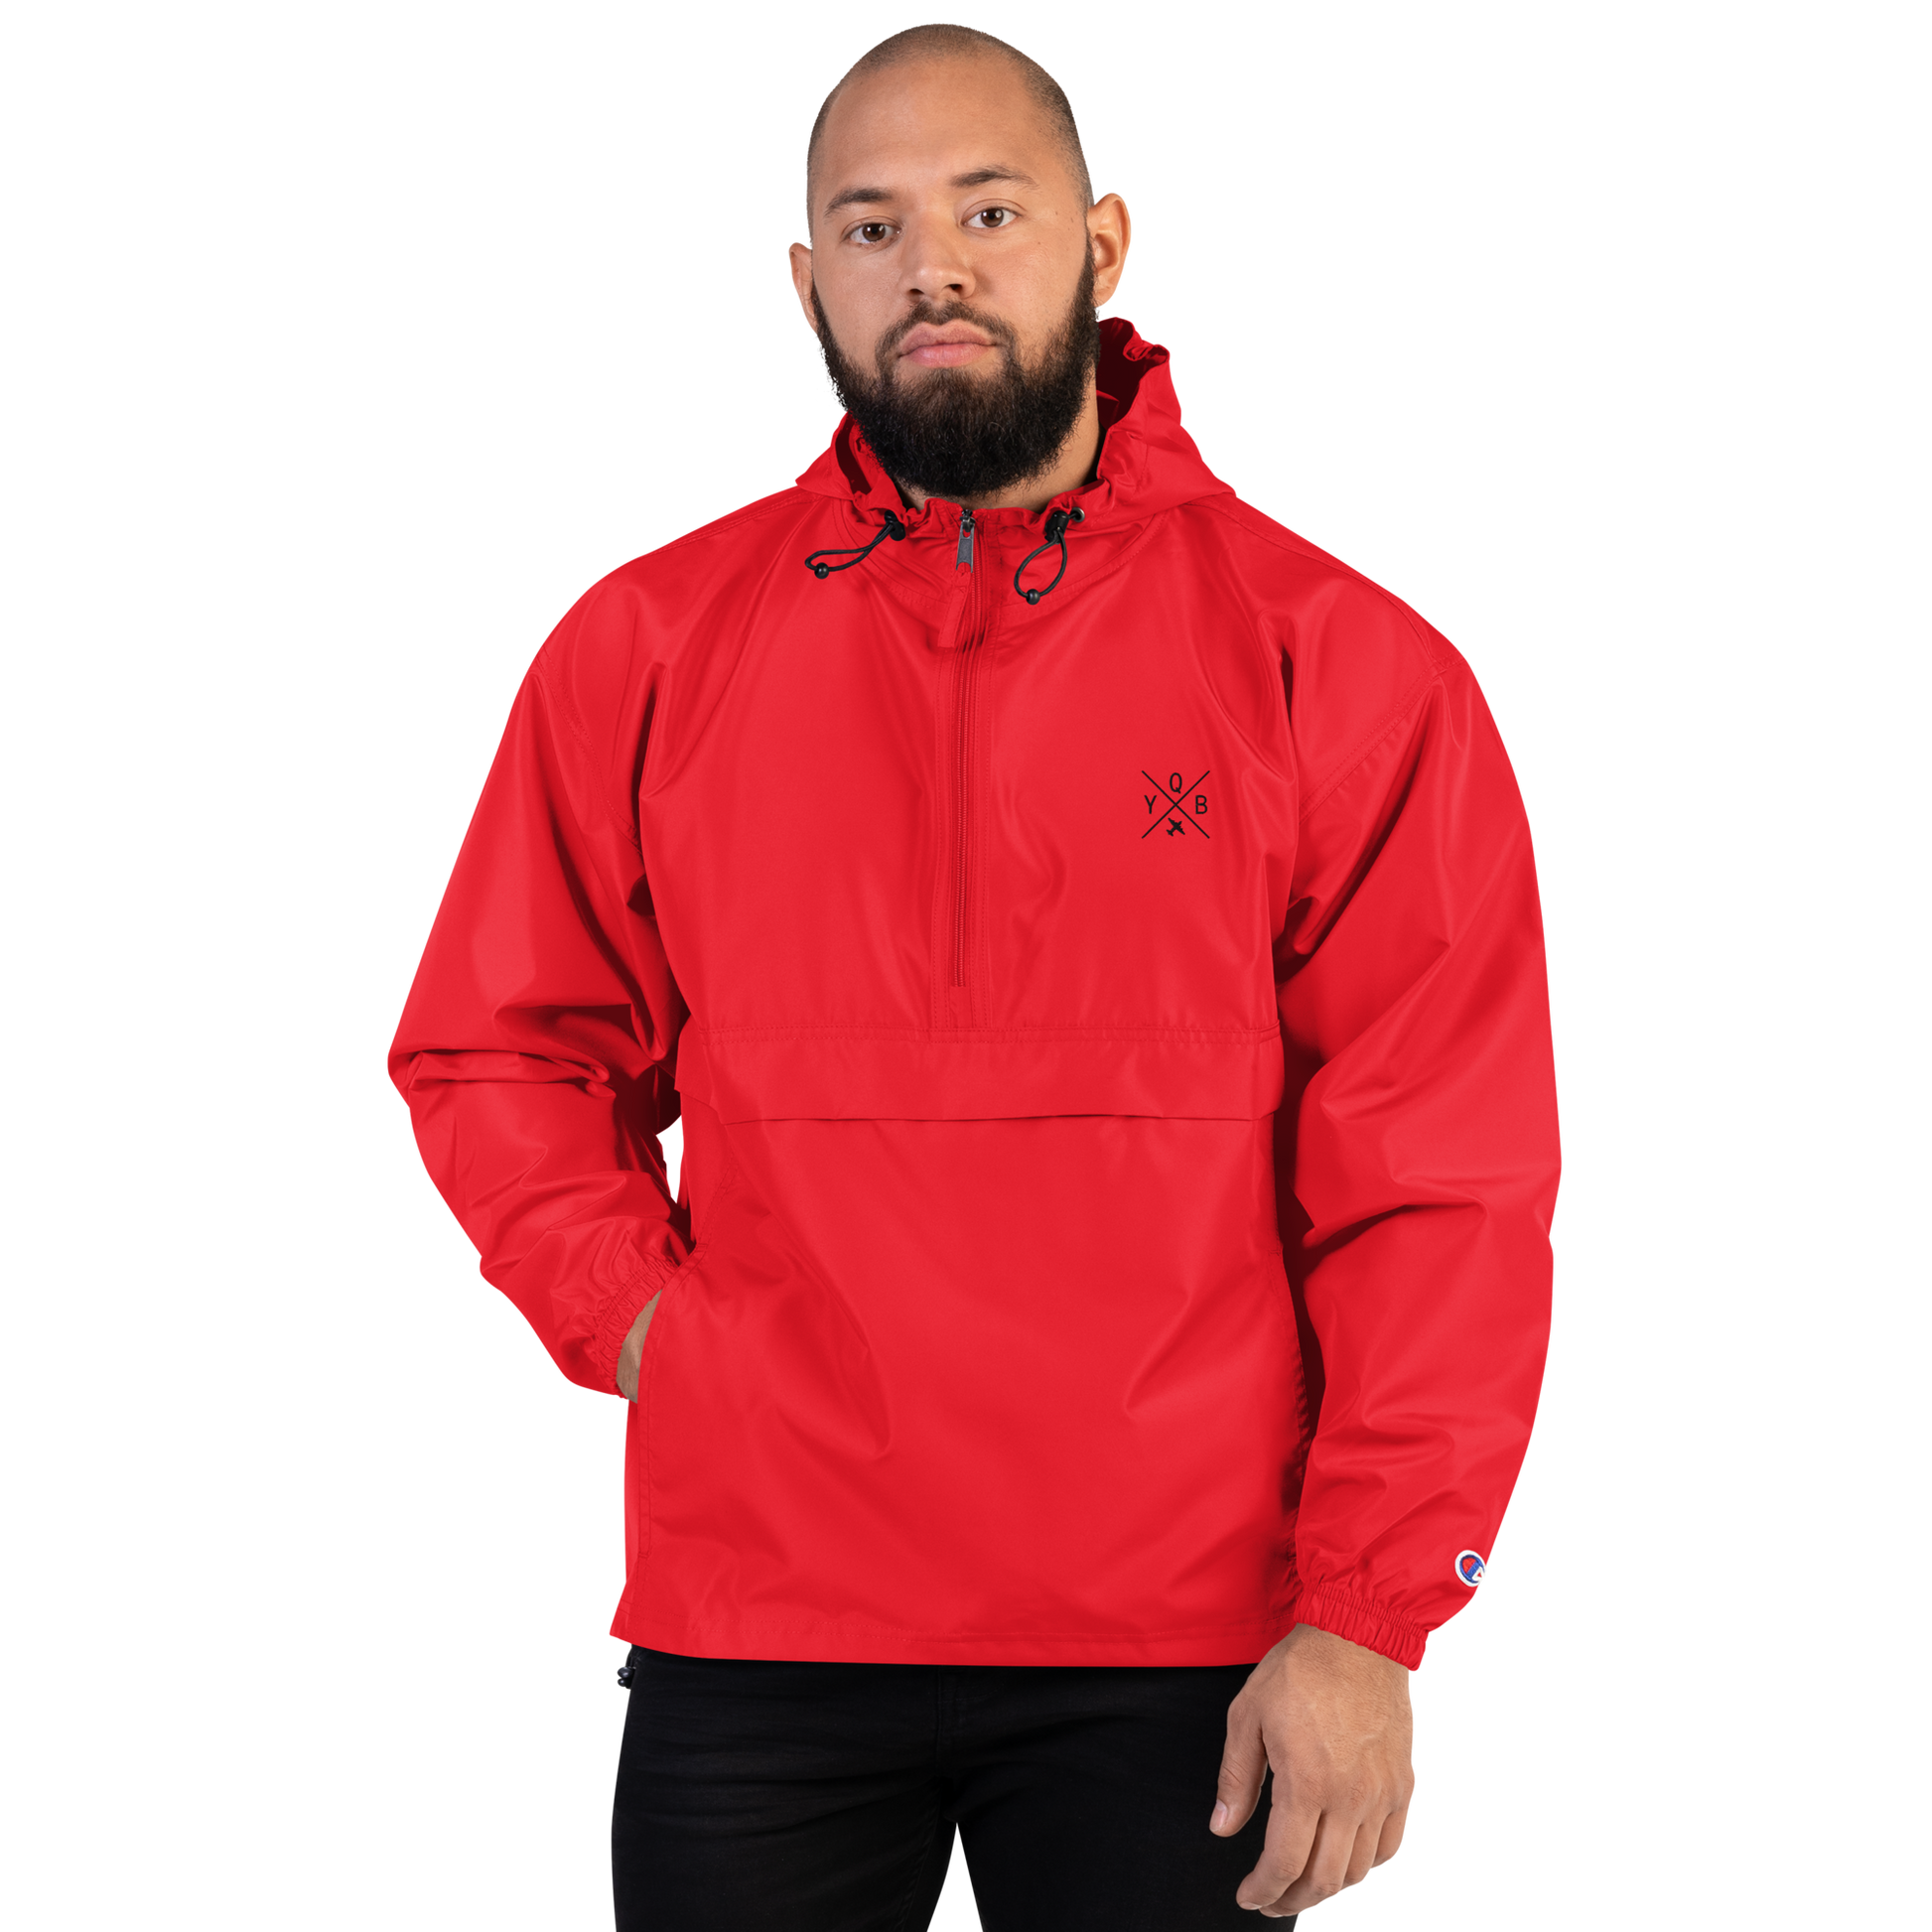 Crossed-X Packable Jacket • YQB Quebec City • YHM Designs - Image 11